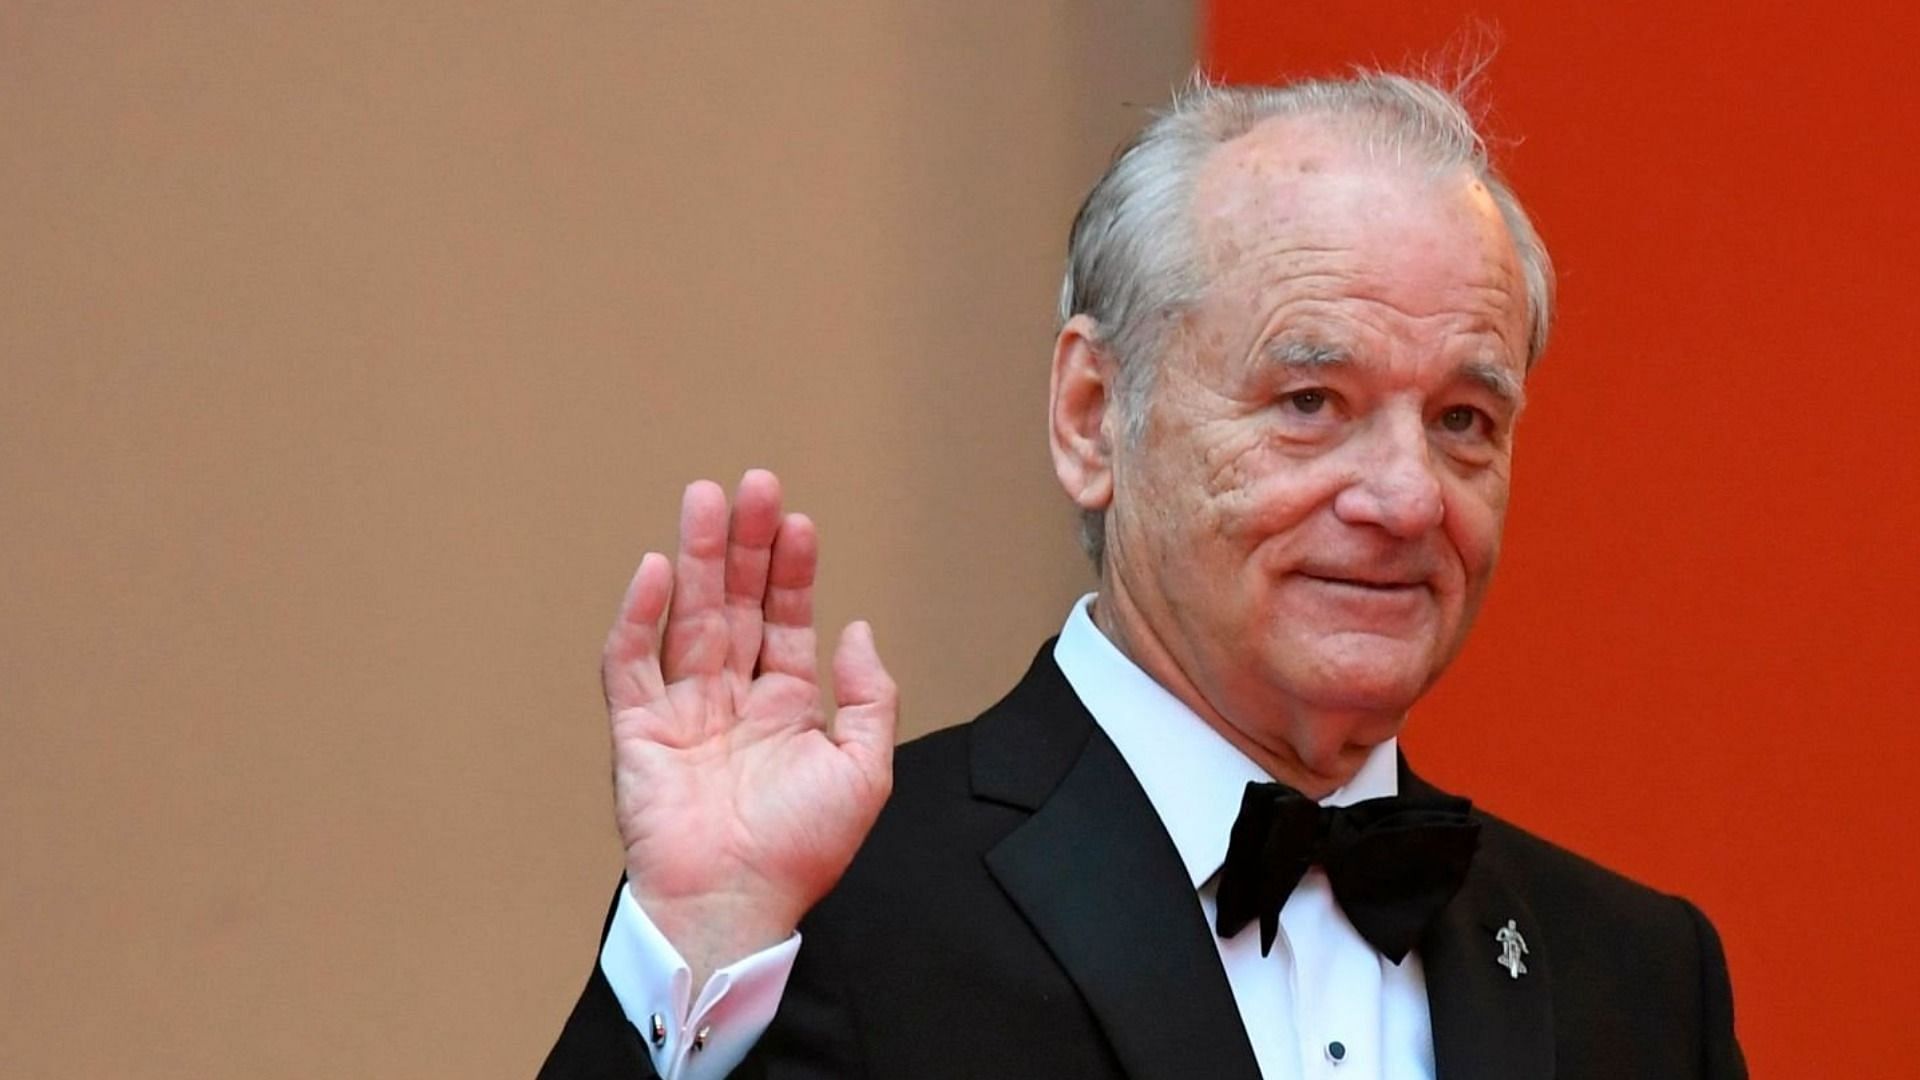 Production for Bill Murray&rsquo;s film Being Mortal has been suspended due to a complaint of &quot;inappropriate behavior&quot; against the actor (Image via Loic Venance/Getty Images)